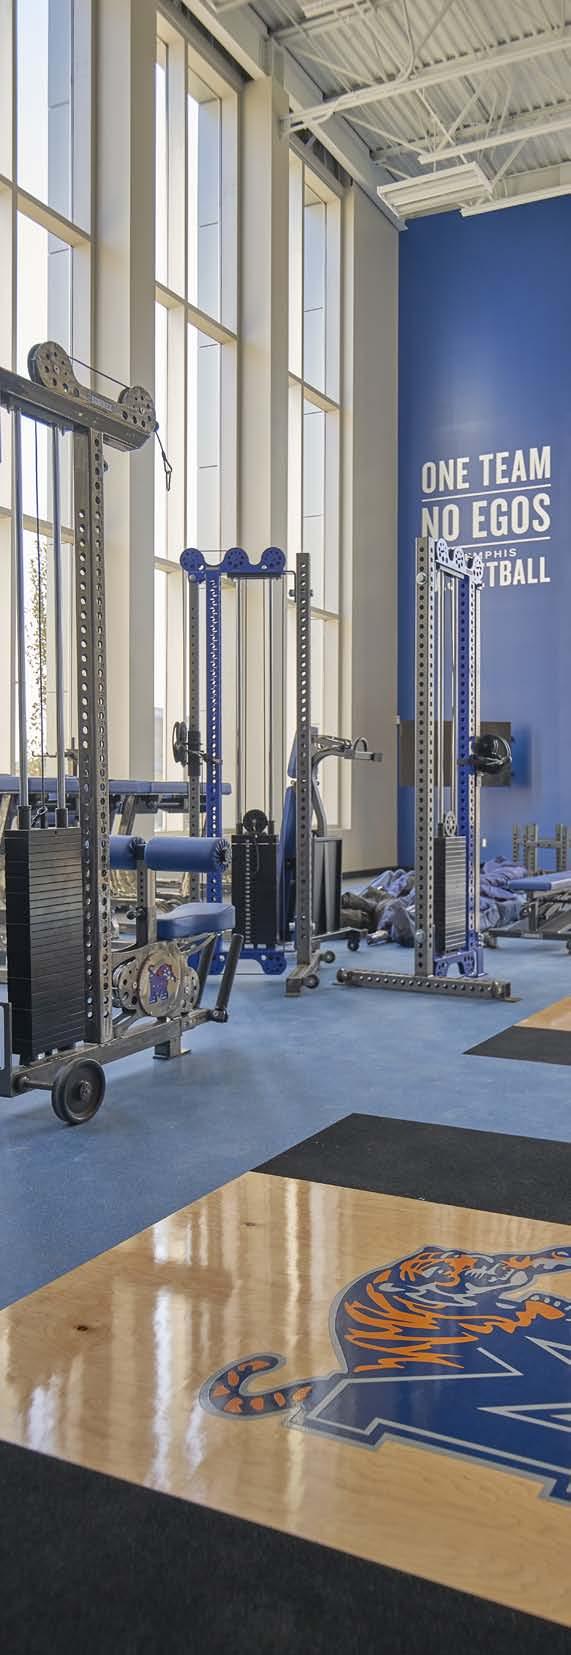 Next-generation training powered by technology Wellness technology A key focus is the overall health and well-being of student-athletes through a dedication to health and recovery.